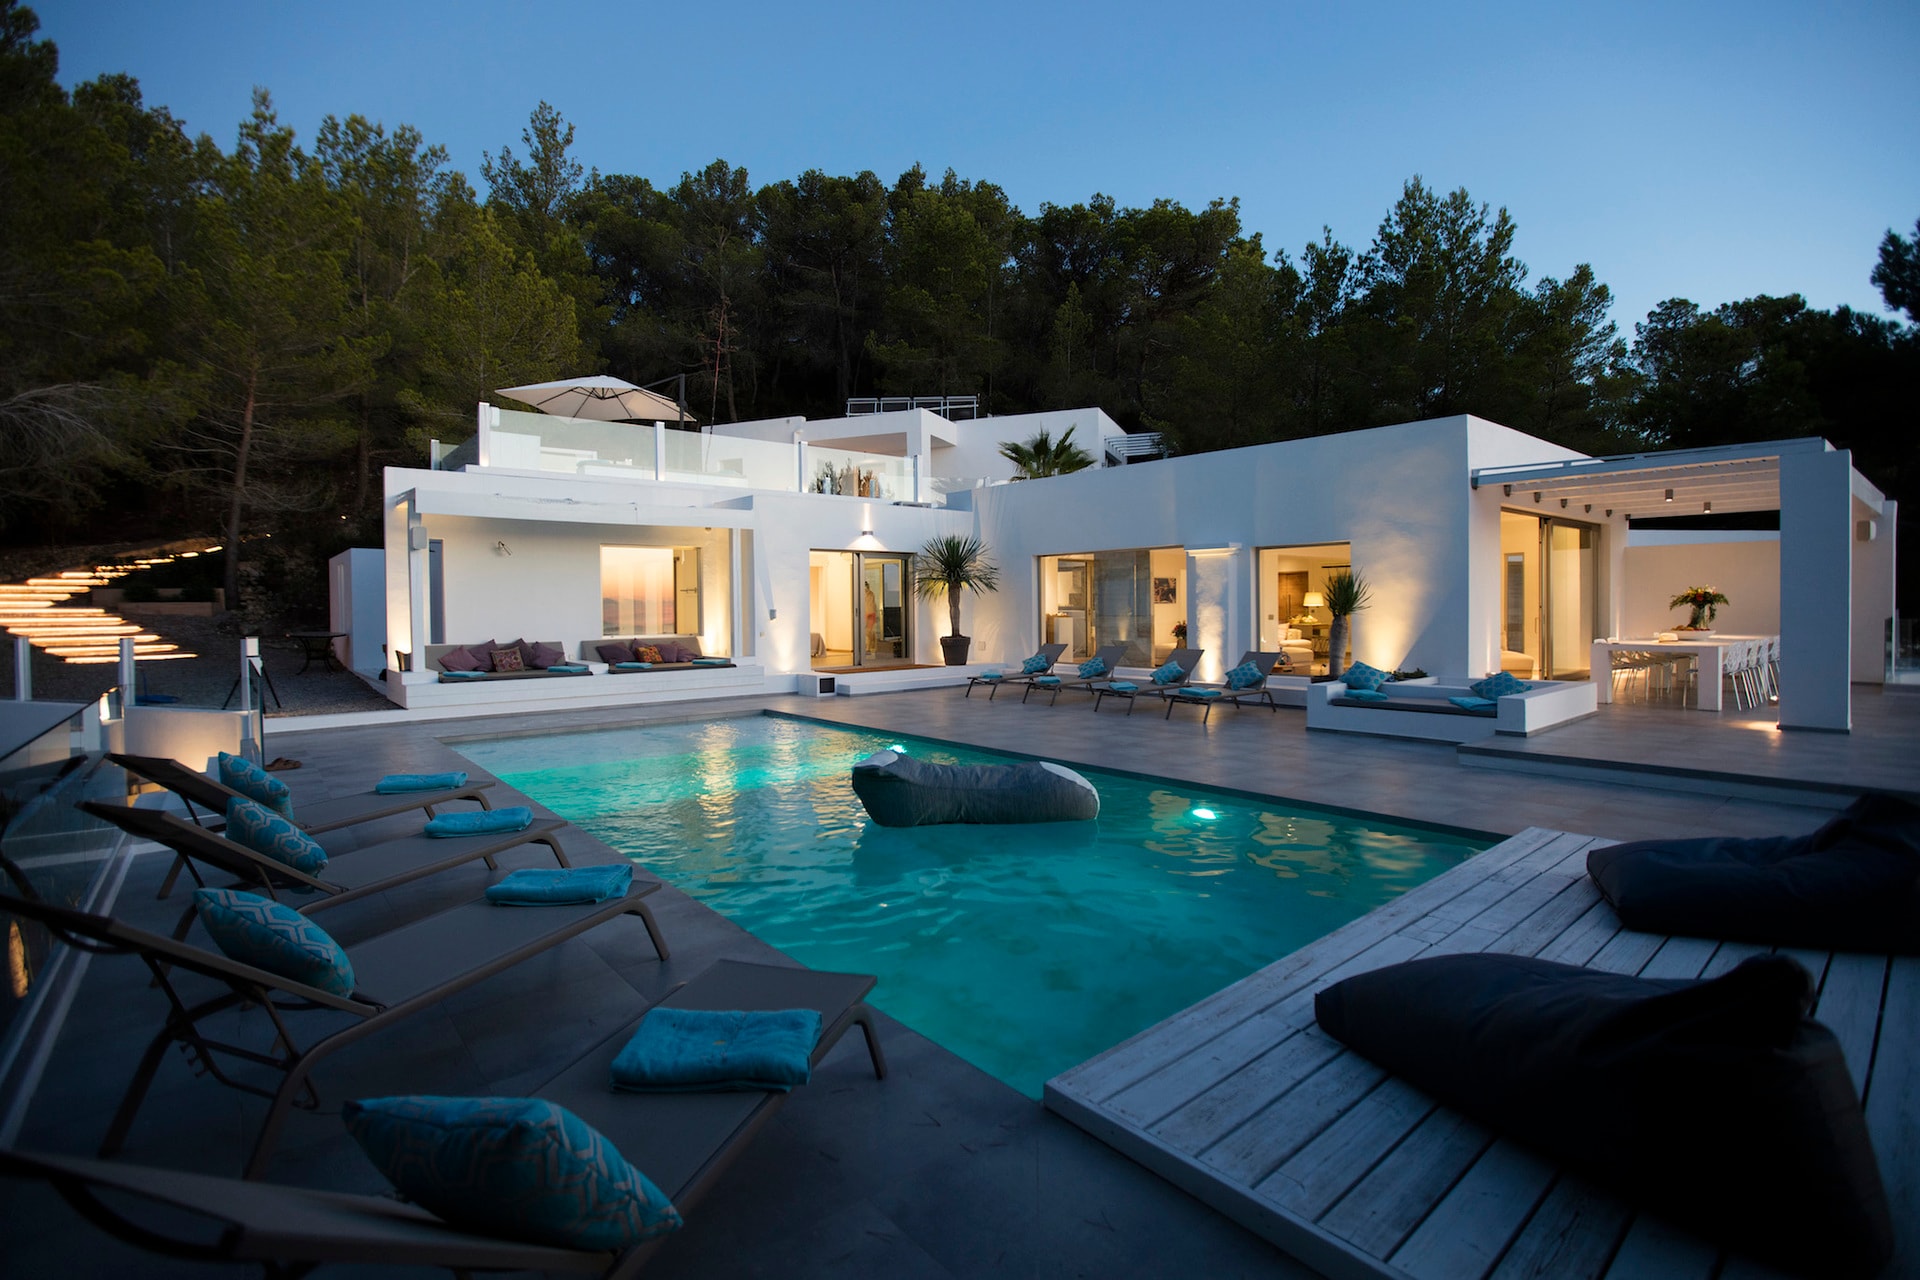 Property Image 1 - Rent this Luxury Villa with Private Pool, Ibiza Villa 1264